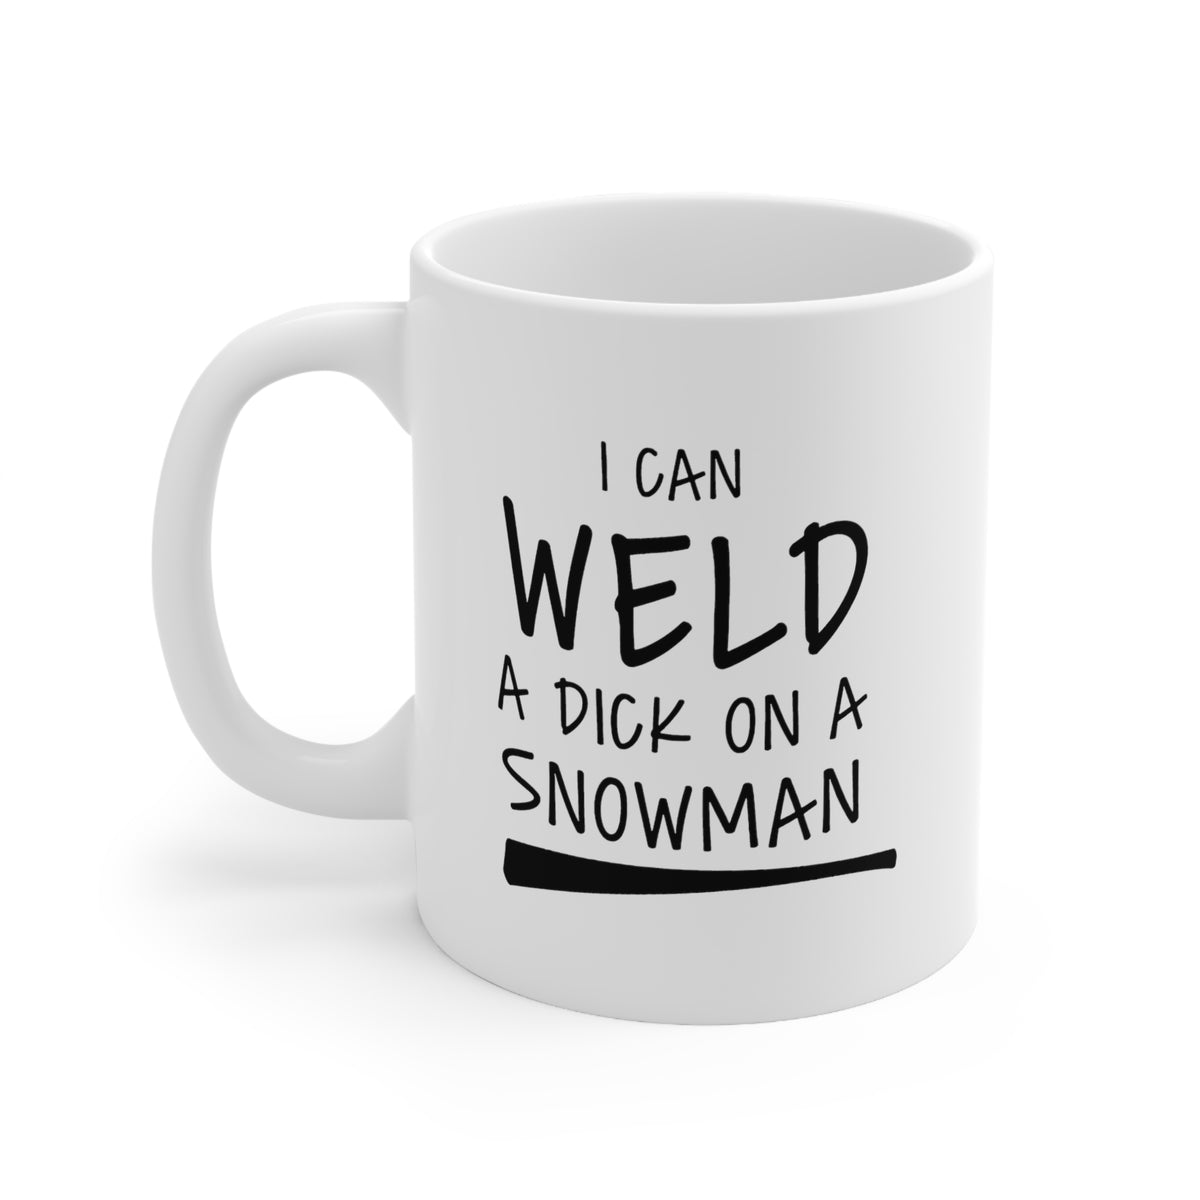 Welder Gifts - Funny Coffee Mug - I Can Weld A Dick On A Snowman - For Weld Men Women